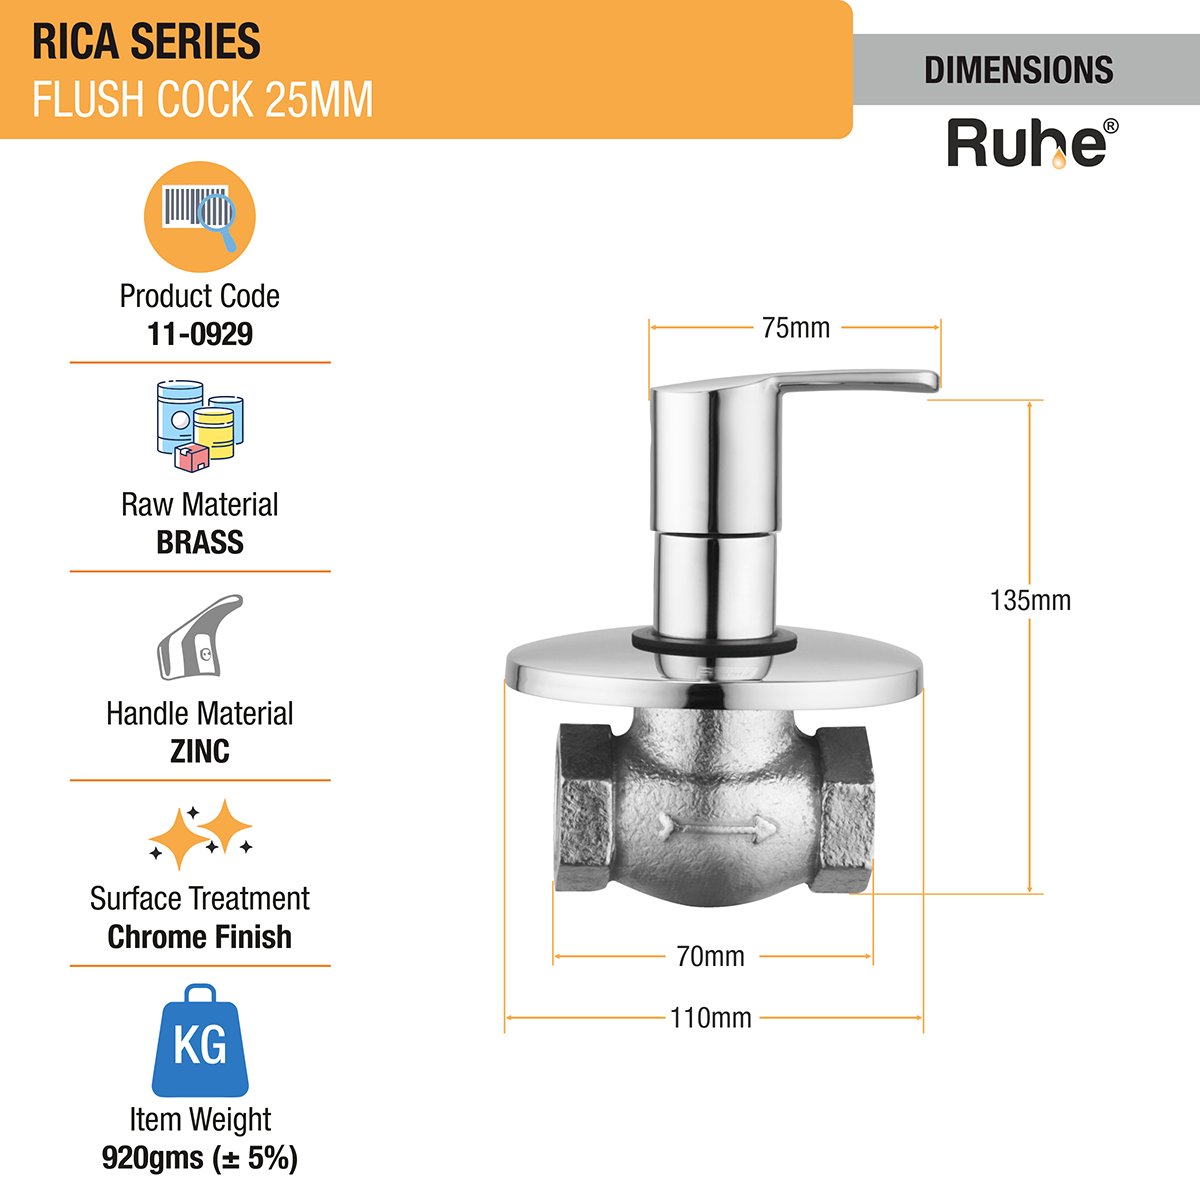 Rica Flush Valve Brass Faucet (25mm) dimensions and size